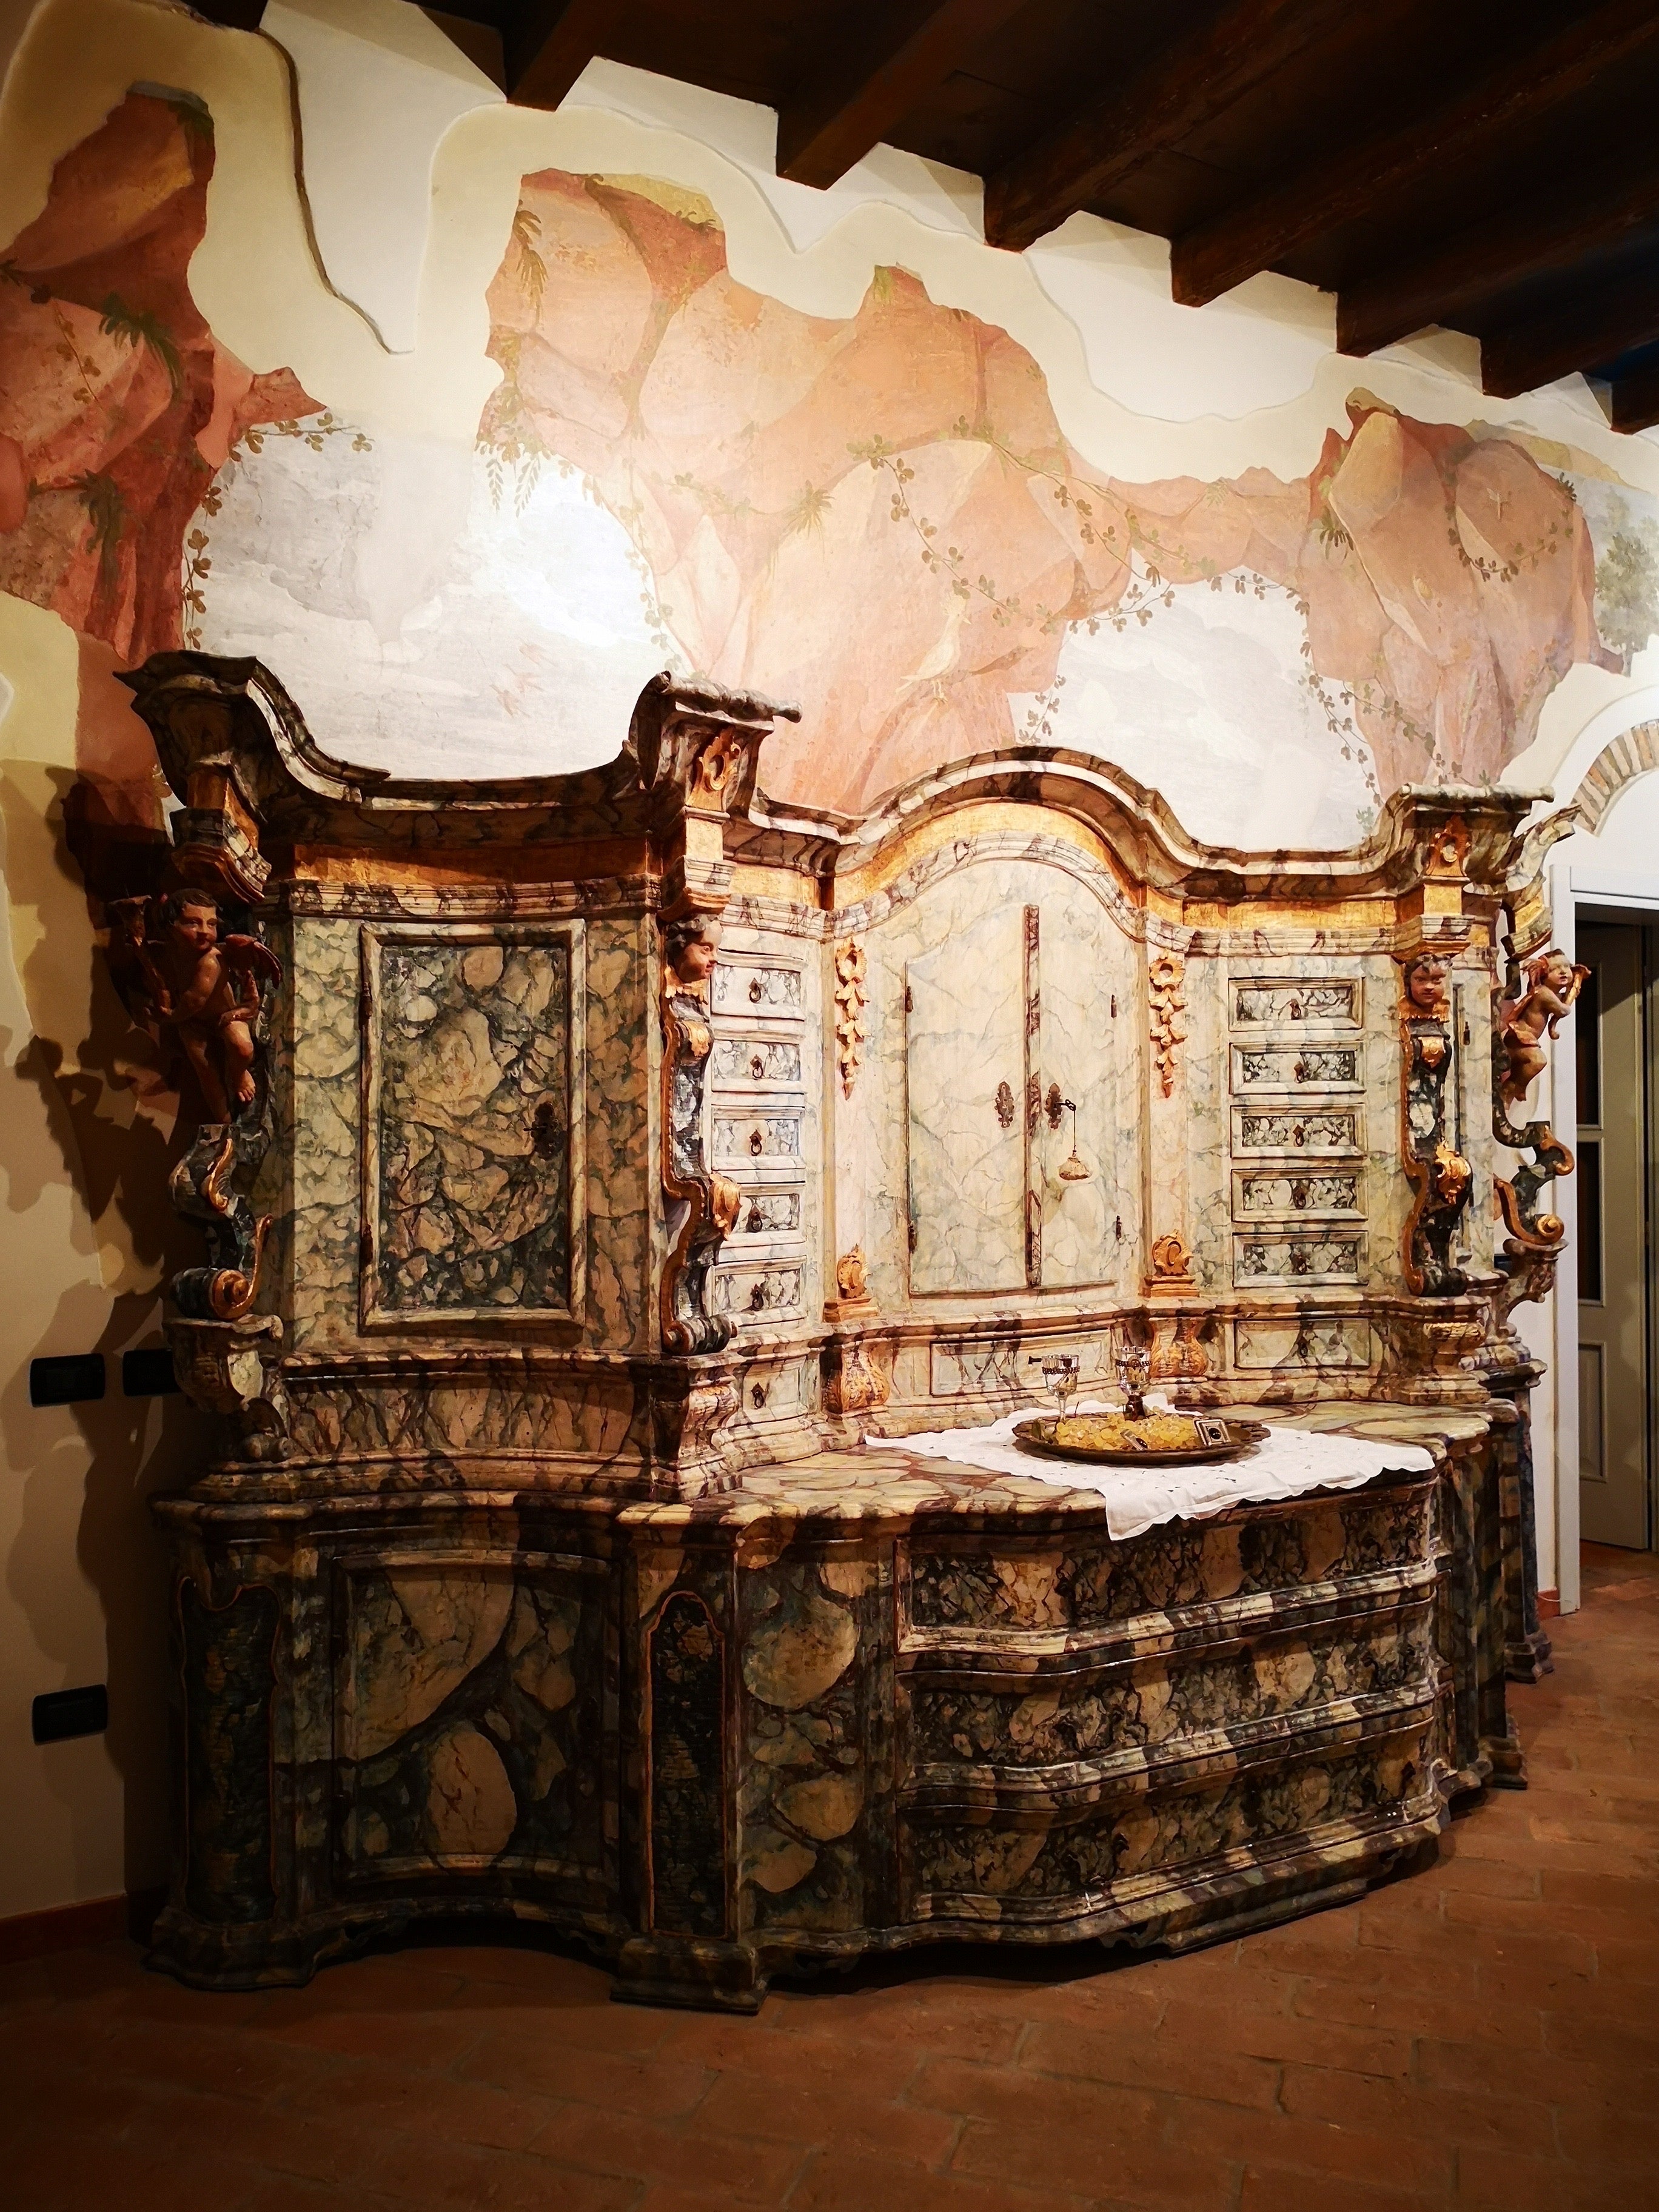 This monumental piece of furniture, of Veneto-Alto Veneto provenance, made entirely of lacquered fir wood. Full seventeenth century (ca. 1650) is presented as an imposing double-bodied sideboard, entirely lacquered in faux marble with various shades